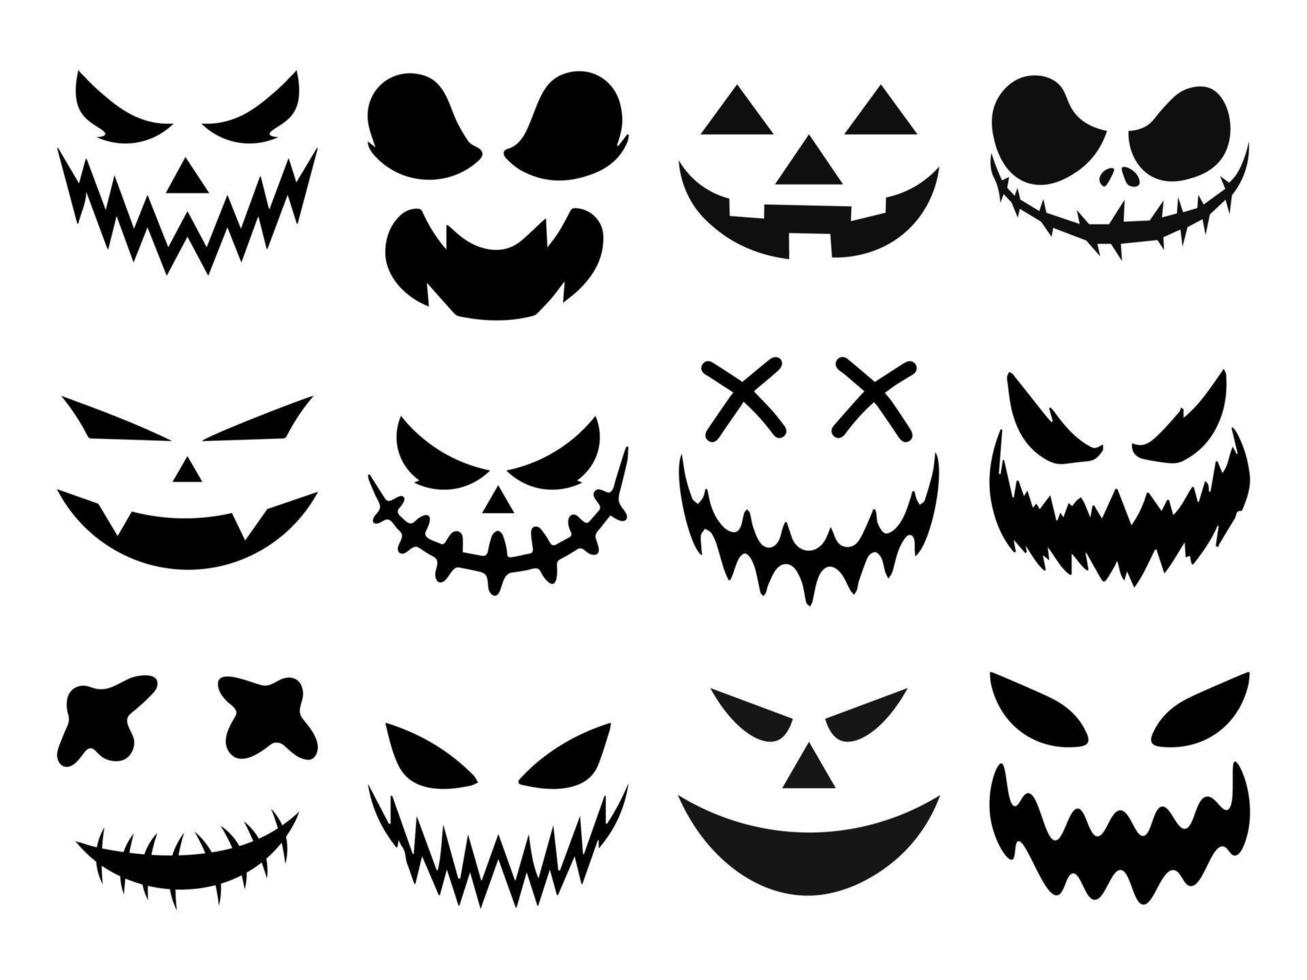 Set of scary halloween pumpkin or ghost faces. Vector illustration.